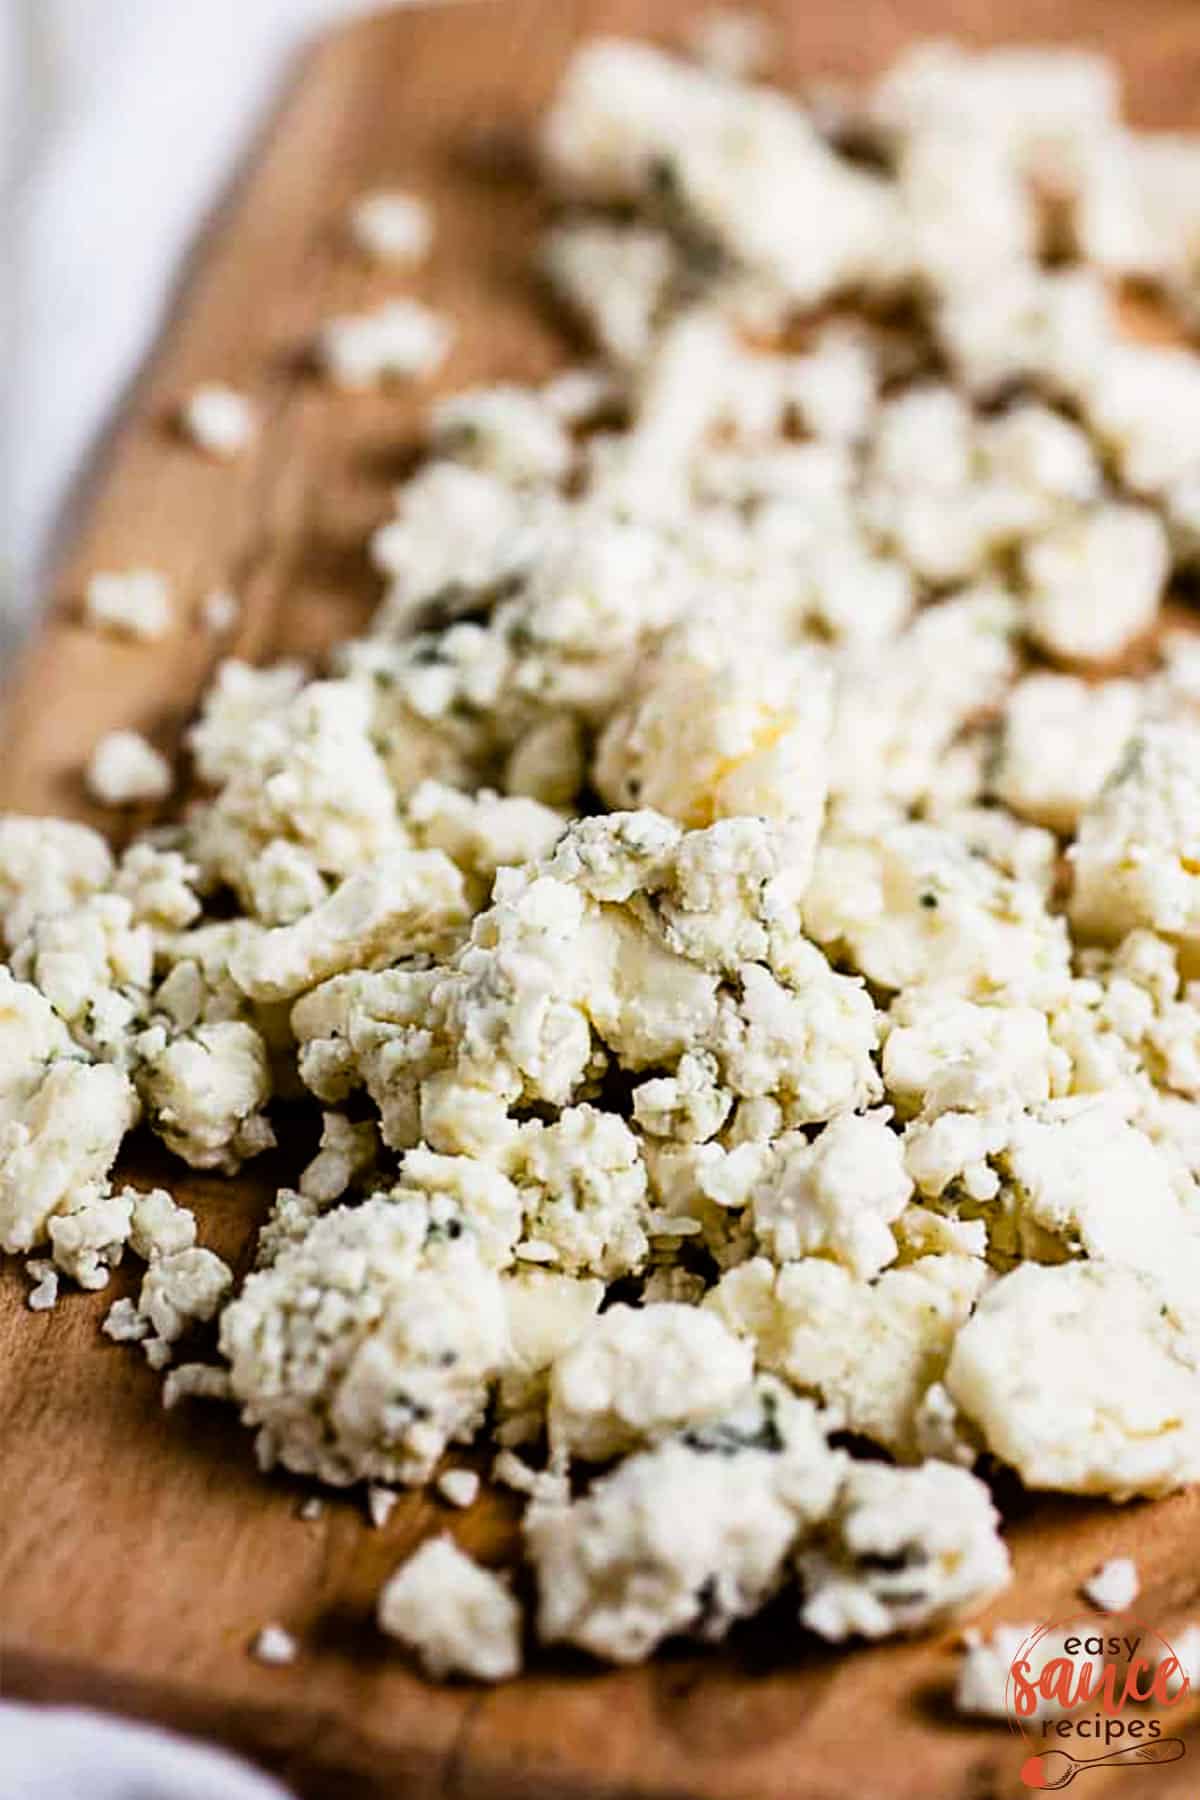 blue cheese crumbles on a cutting board